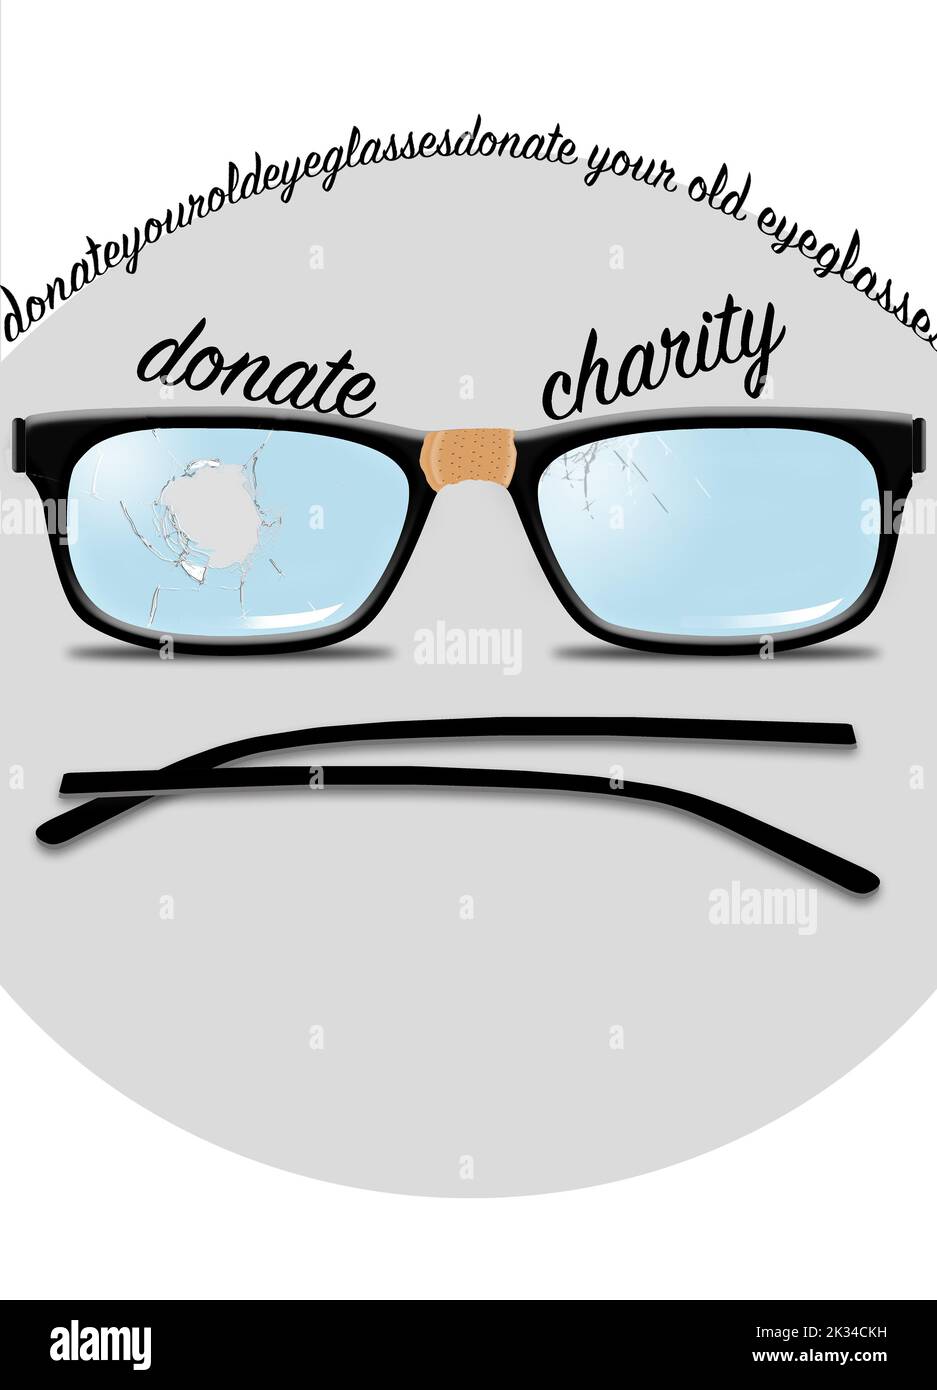 Broken eye glasses with parts arranged to look like a face is seen in a 3-d illustration about donating old eyewear to charity to benefit the poor. Stock Photo